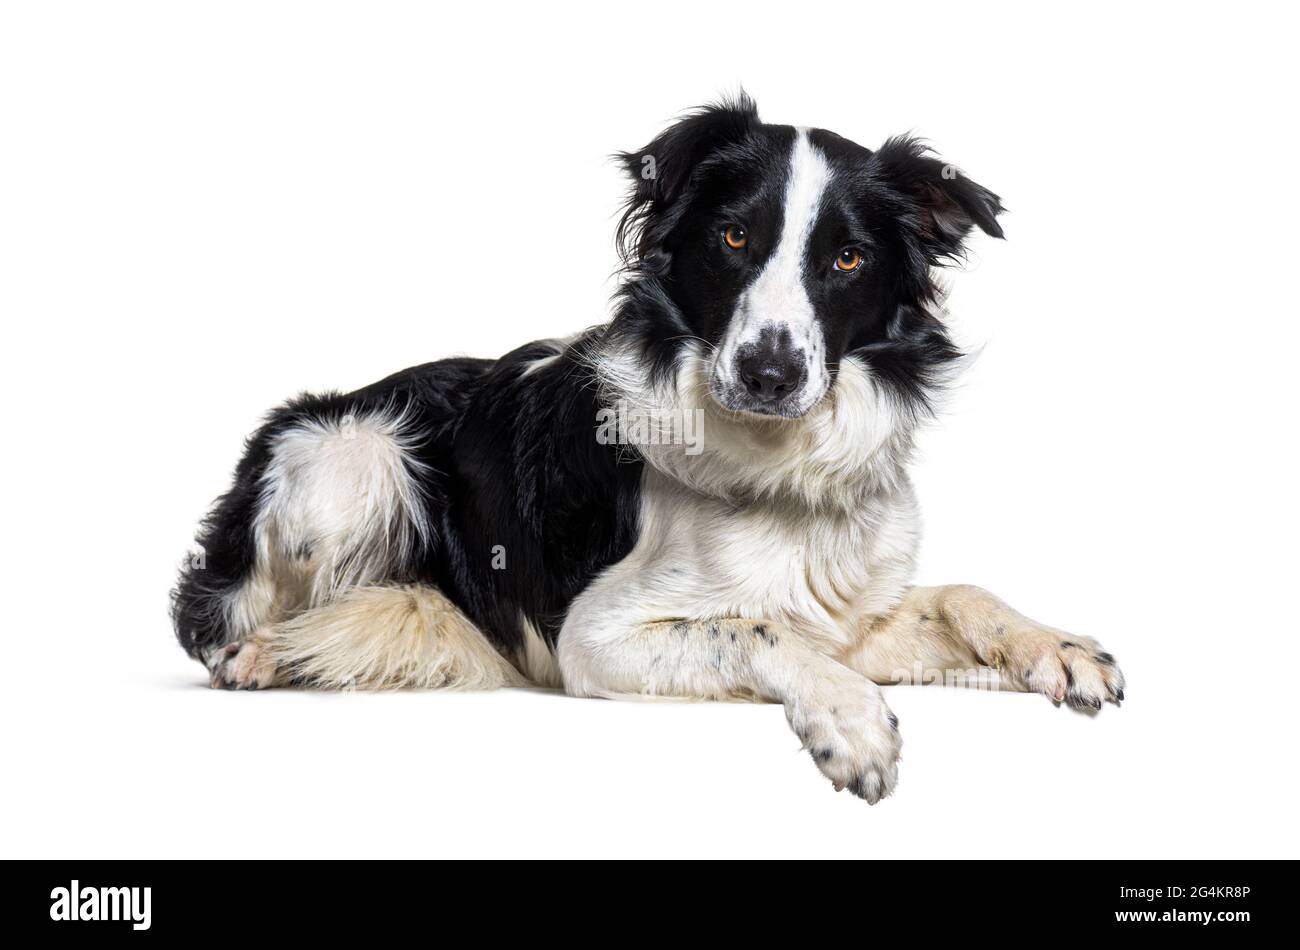 Lying down on a empty board Border collie dog looking at the camera Stock Photo